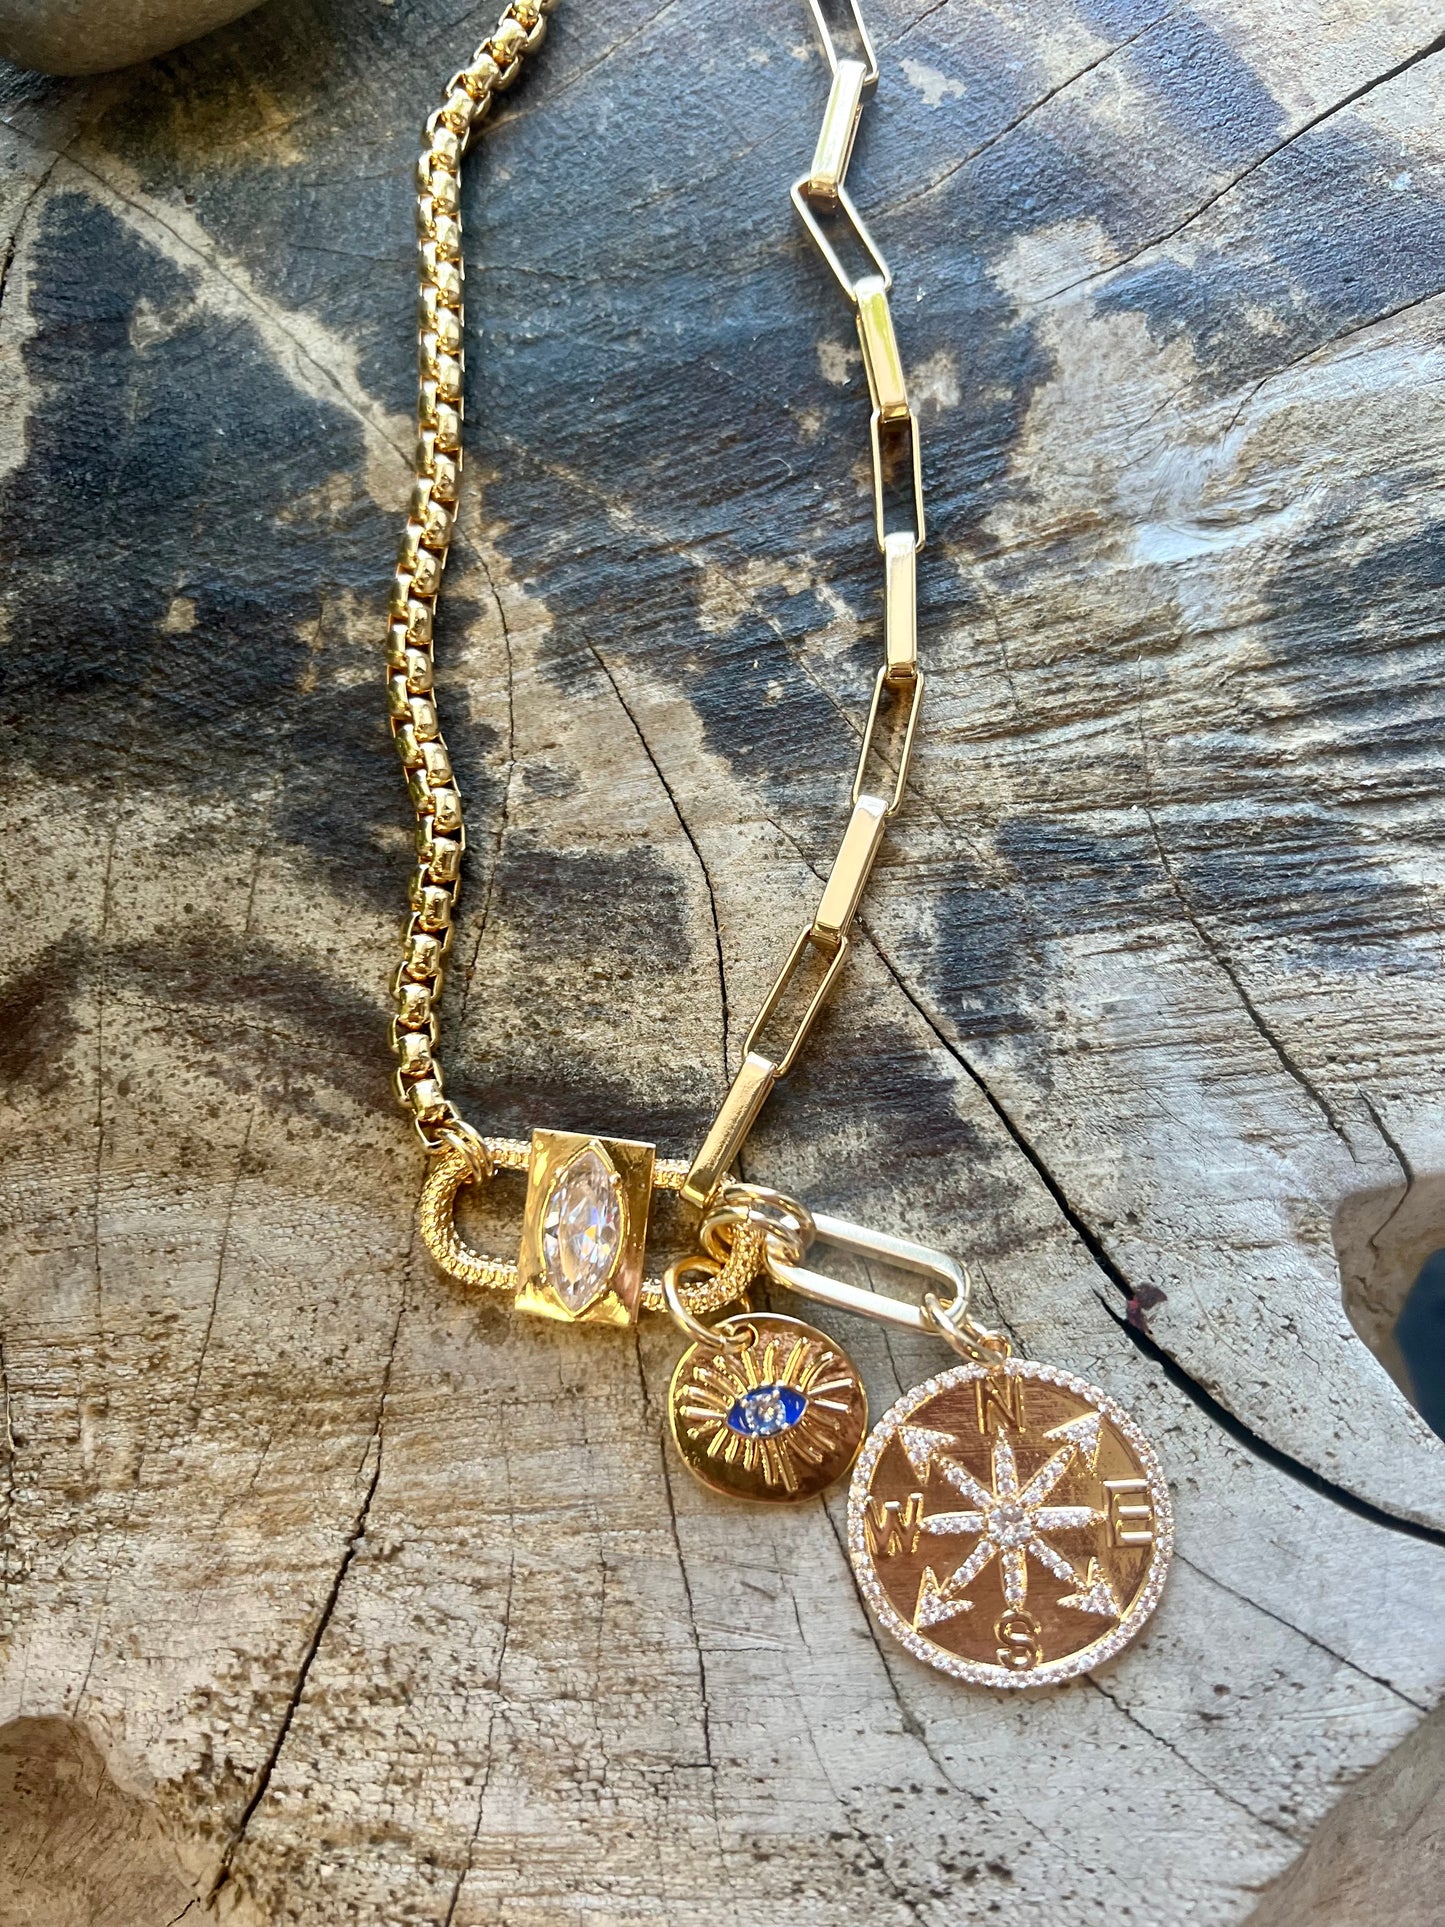 Find Your Way Compass Gold Necklace